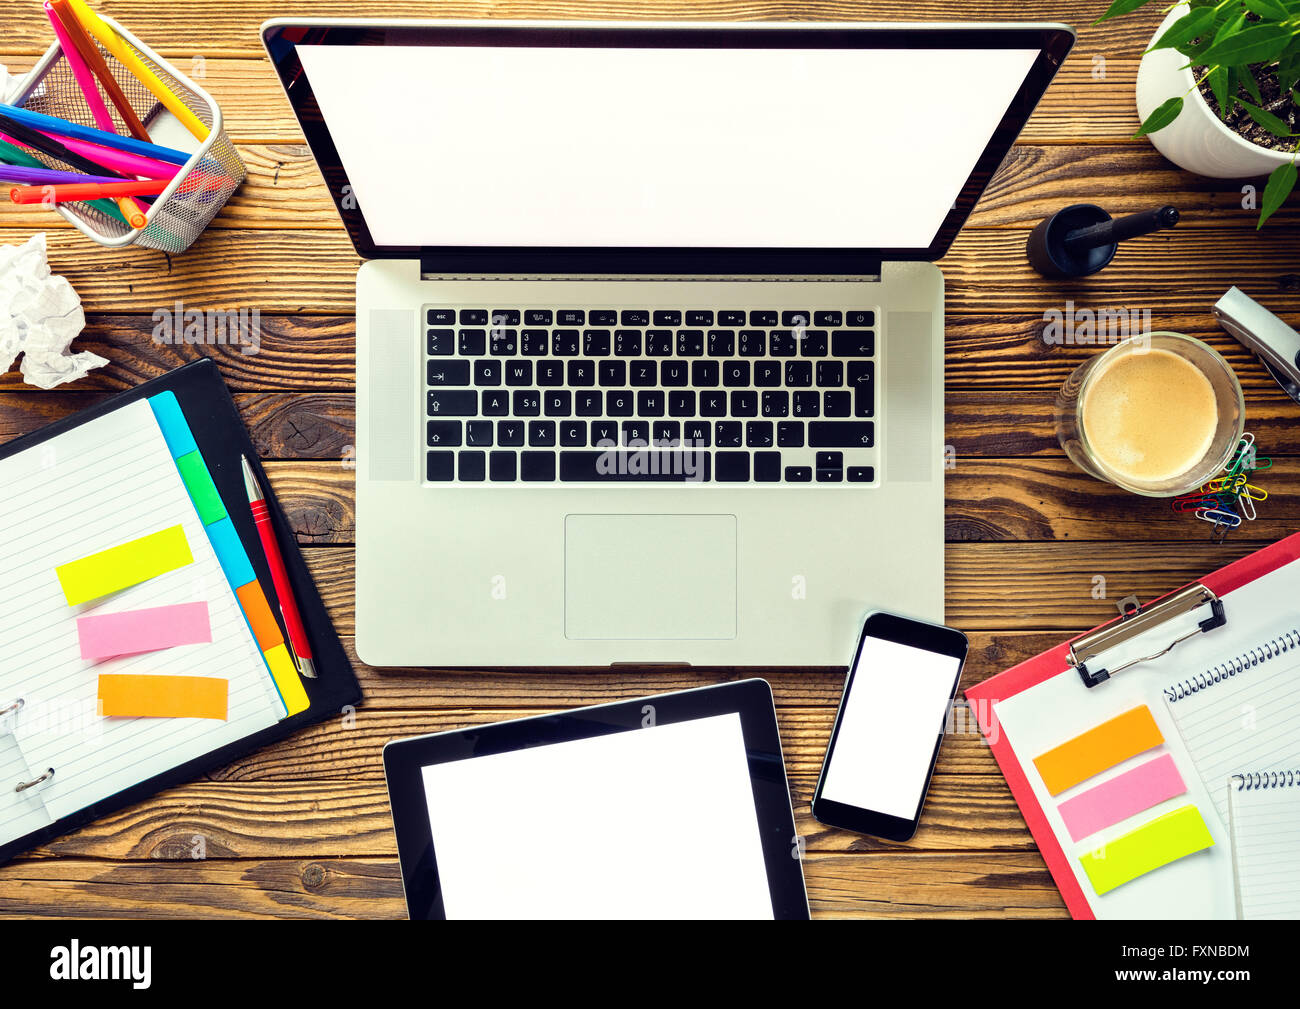 Laptop with other modern electonic devices on desk Stock Photo